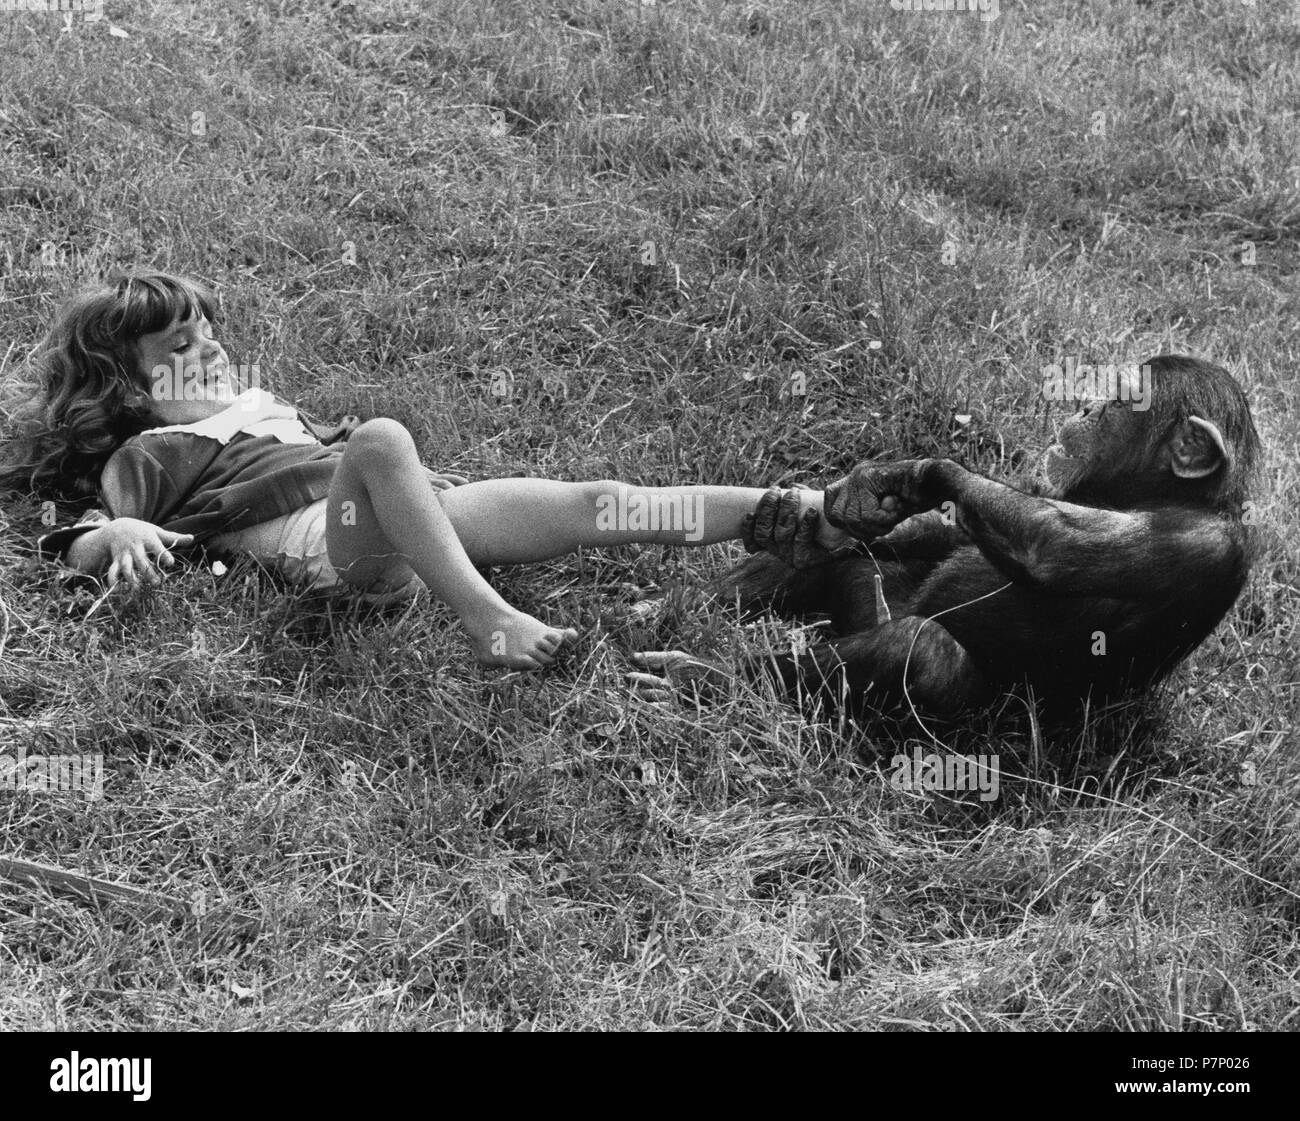 Girl and chimpanzee playing, England, Great Britain Stock Photo